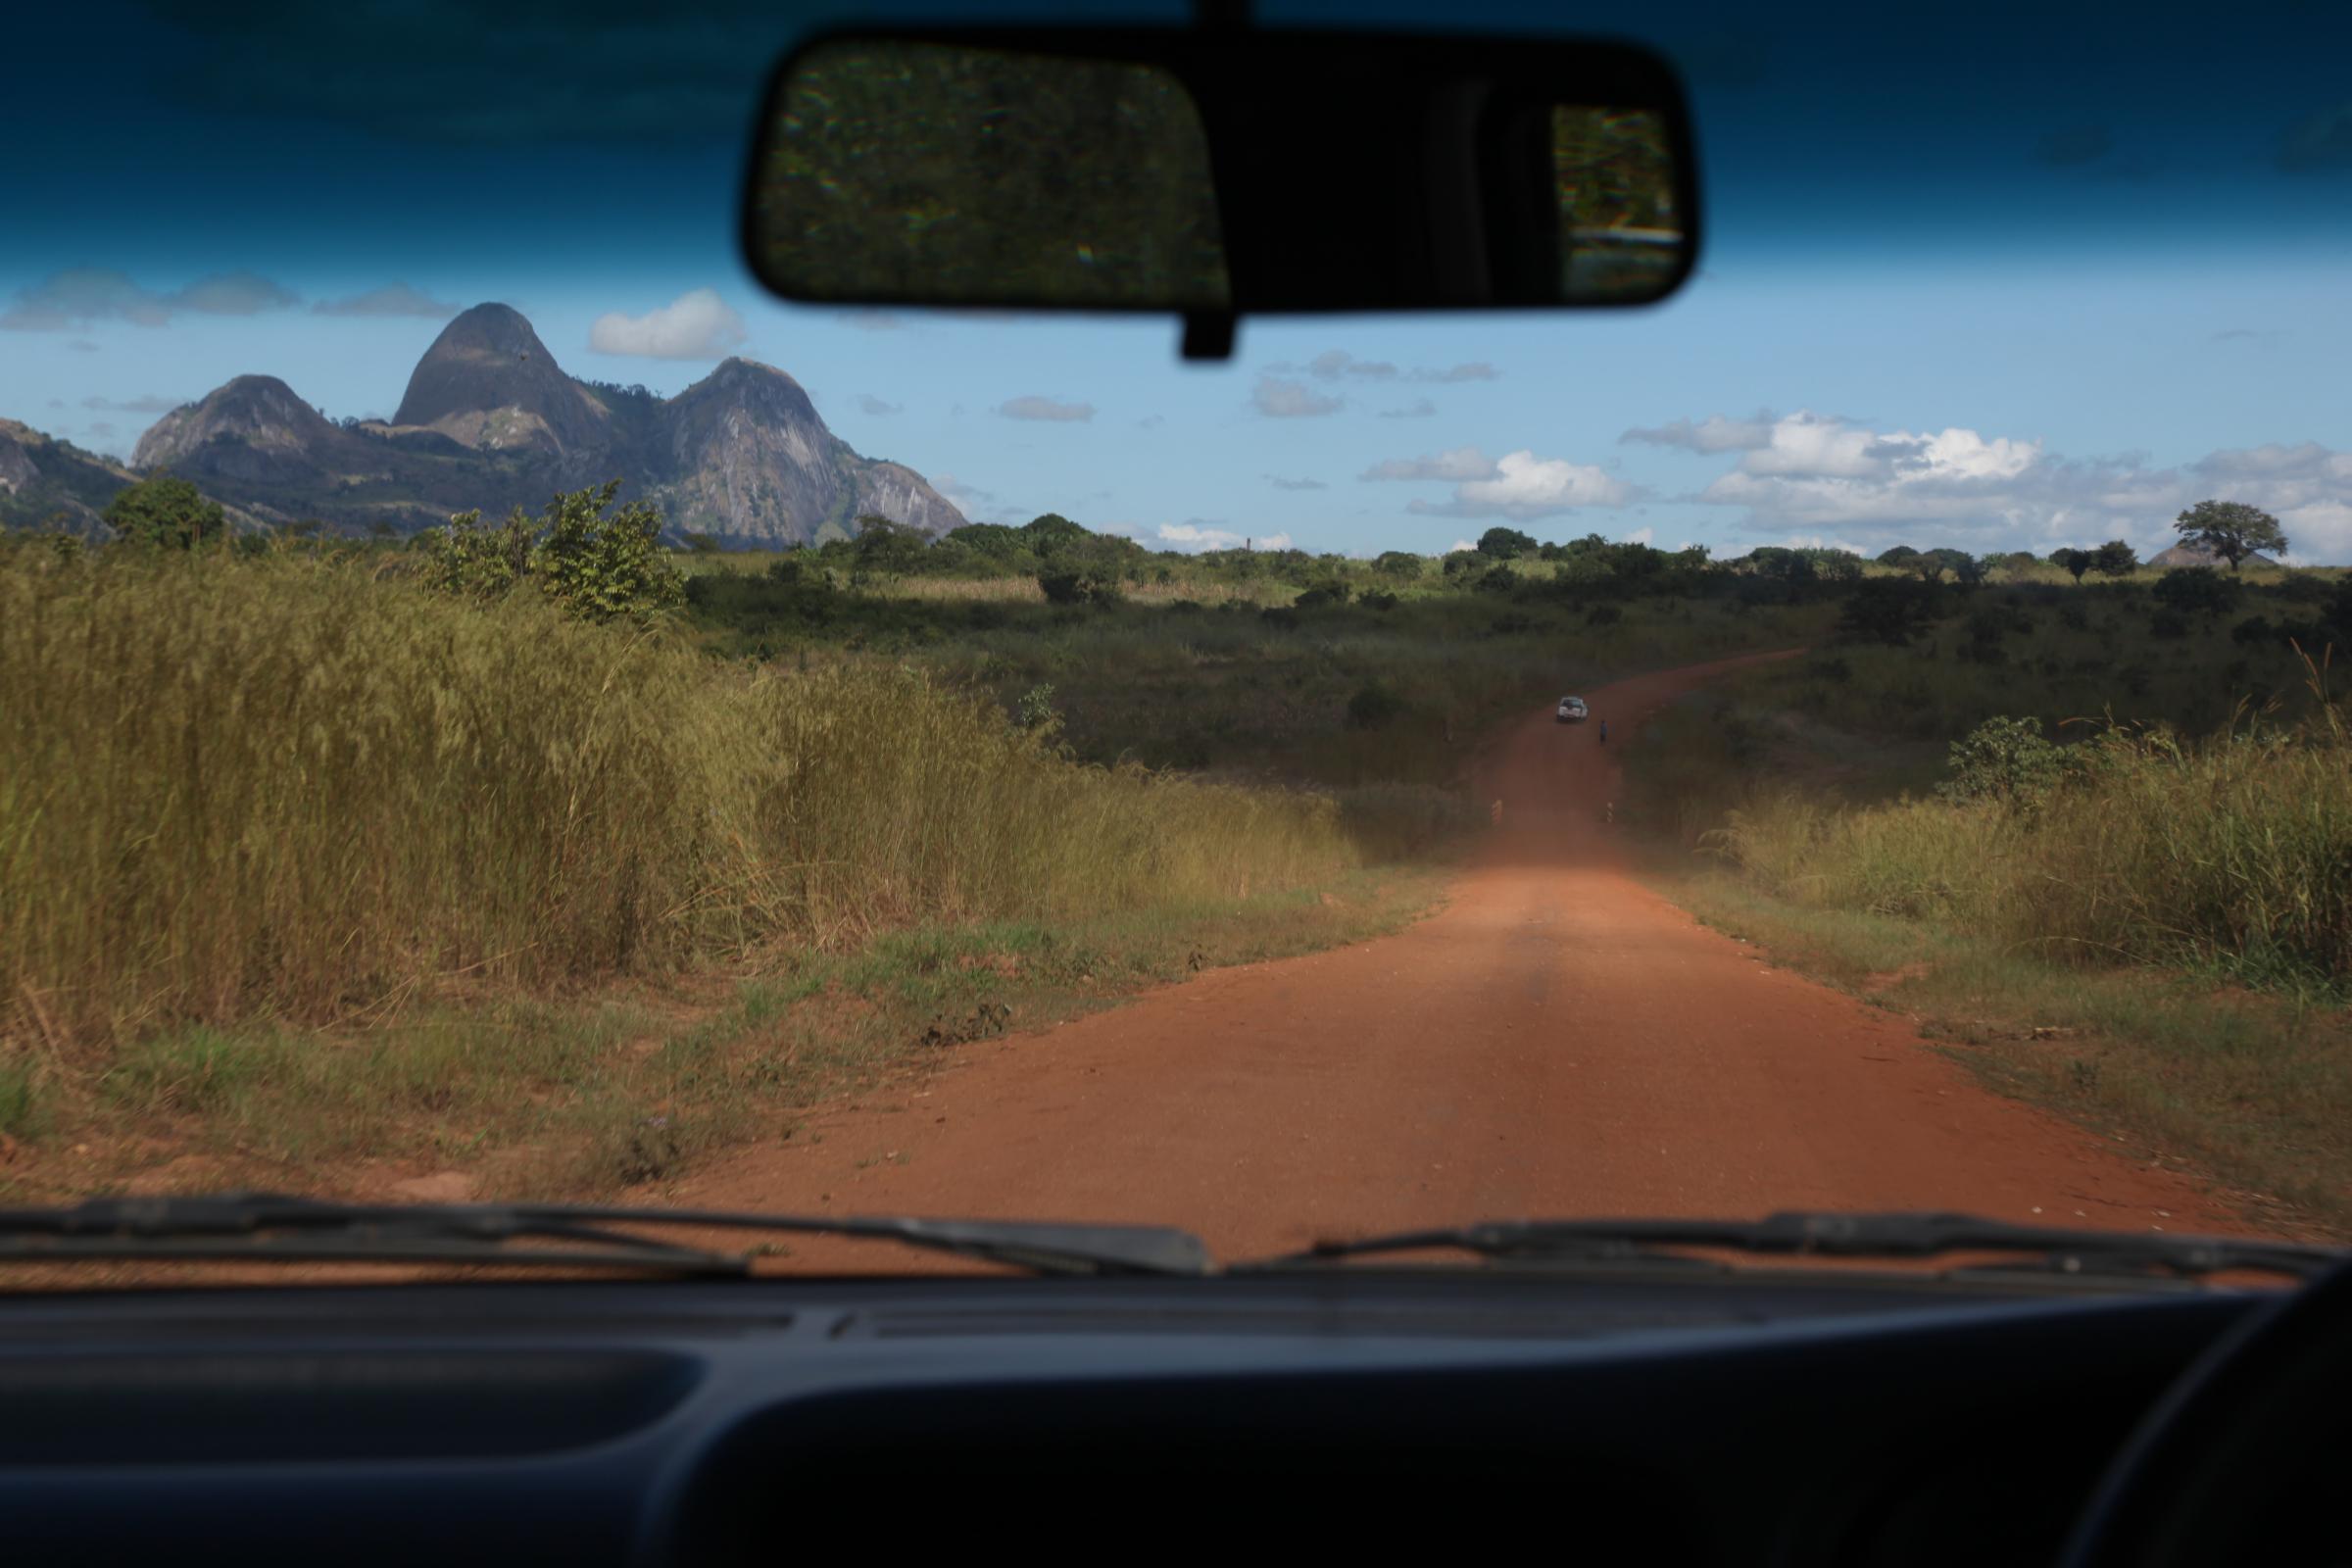 Road - Mozambique. May 5, 2009
Car journey between Sussumbene...